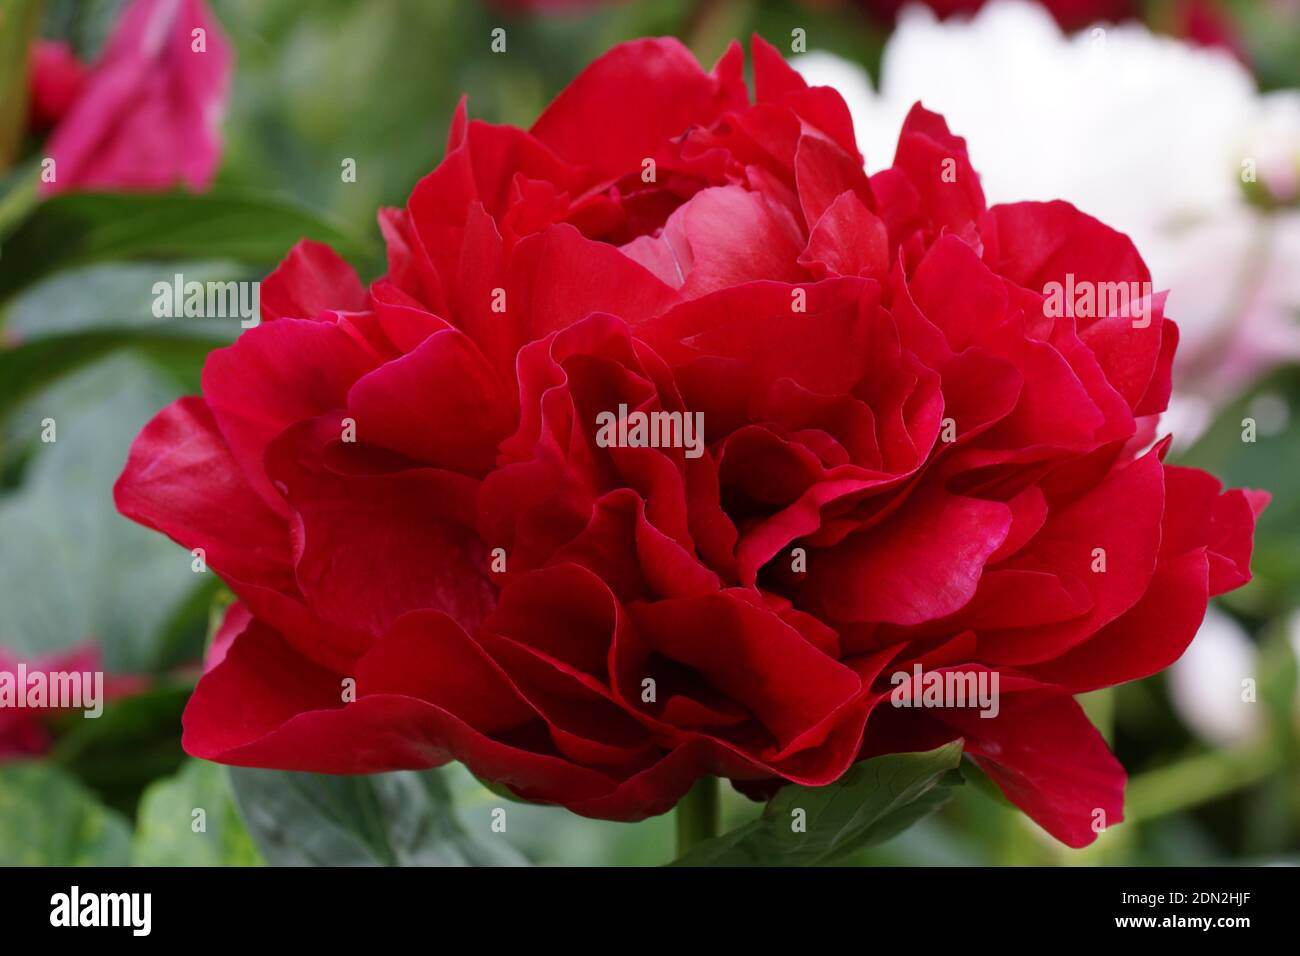 Paeonia Henry Bockstoce. Double red peony flower. Paeonia lactiflora (Chinese peony or common garden peony). One flower close-up outdoors. Stock Photo